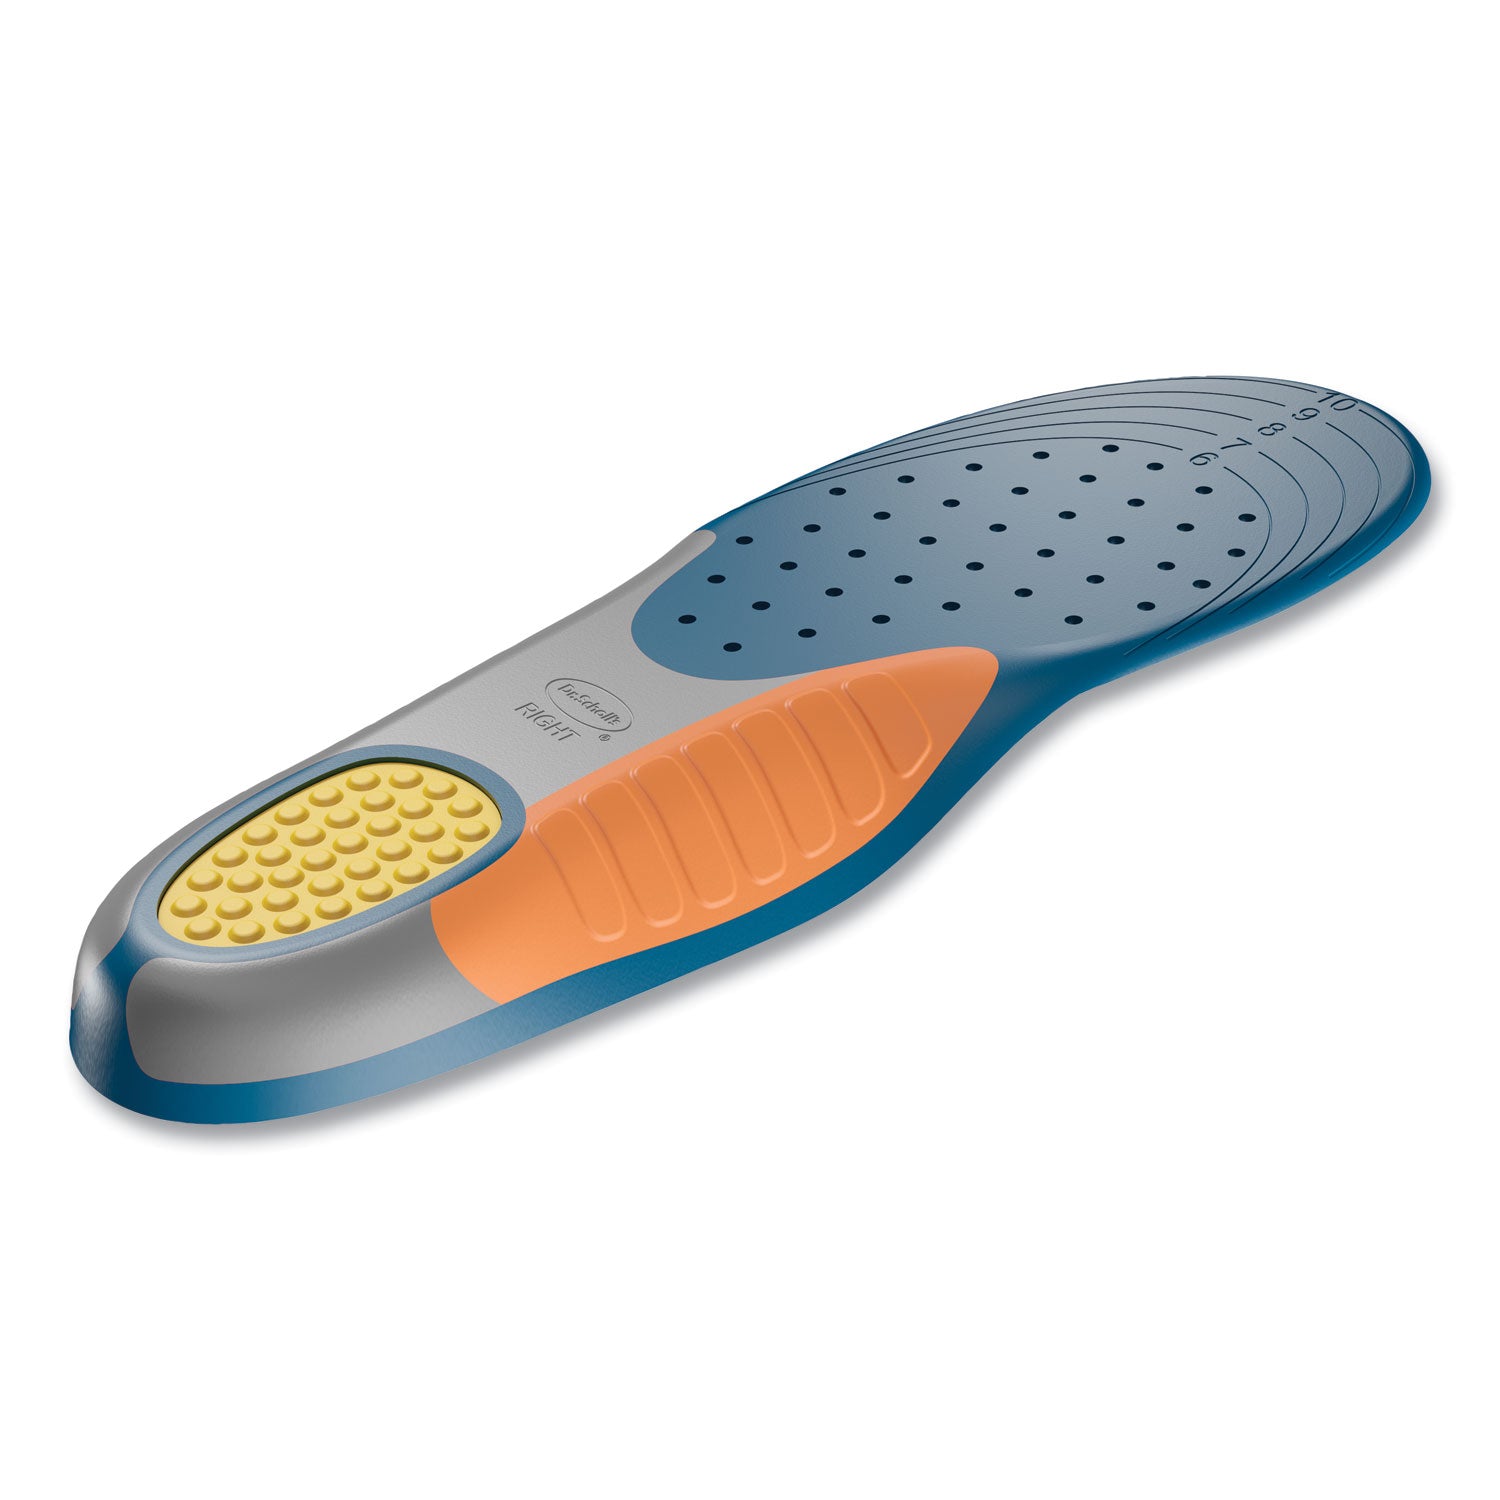 pain-relief-extra-support-orthotic-insoles-women-sizes-6-to-11-gray-blue-orange-yellow-pair_dsc59013 - 4